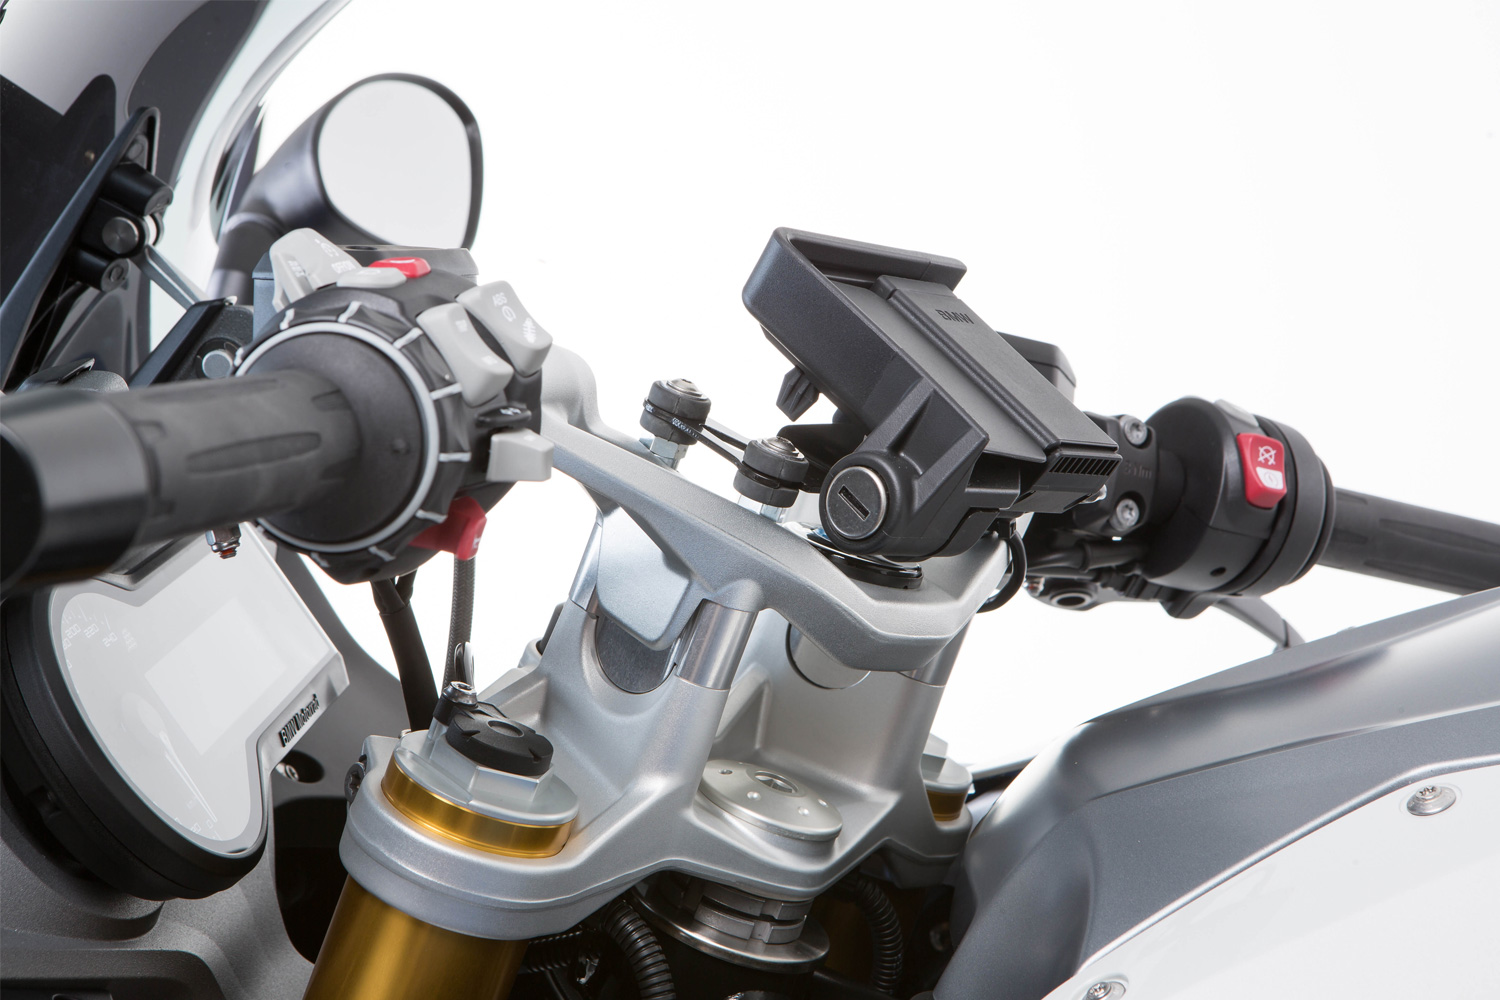 Wunderlich mounting kit for SOS-system